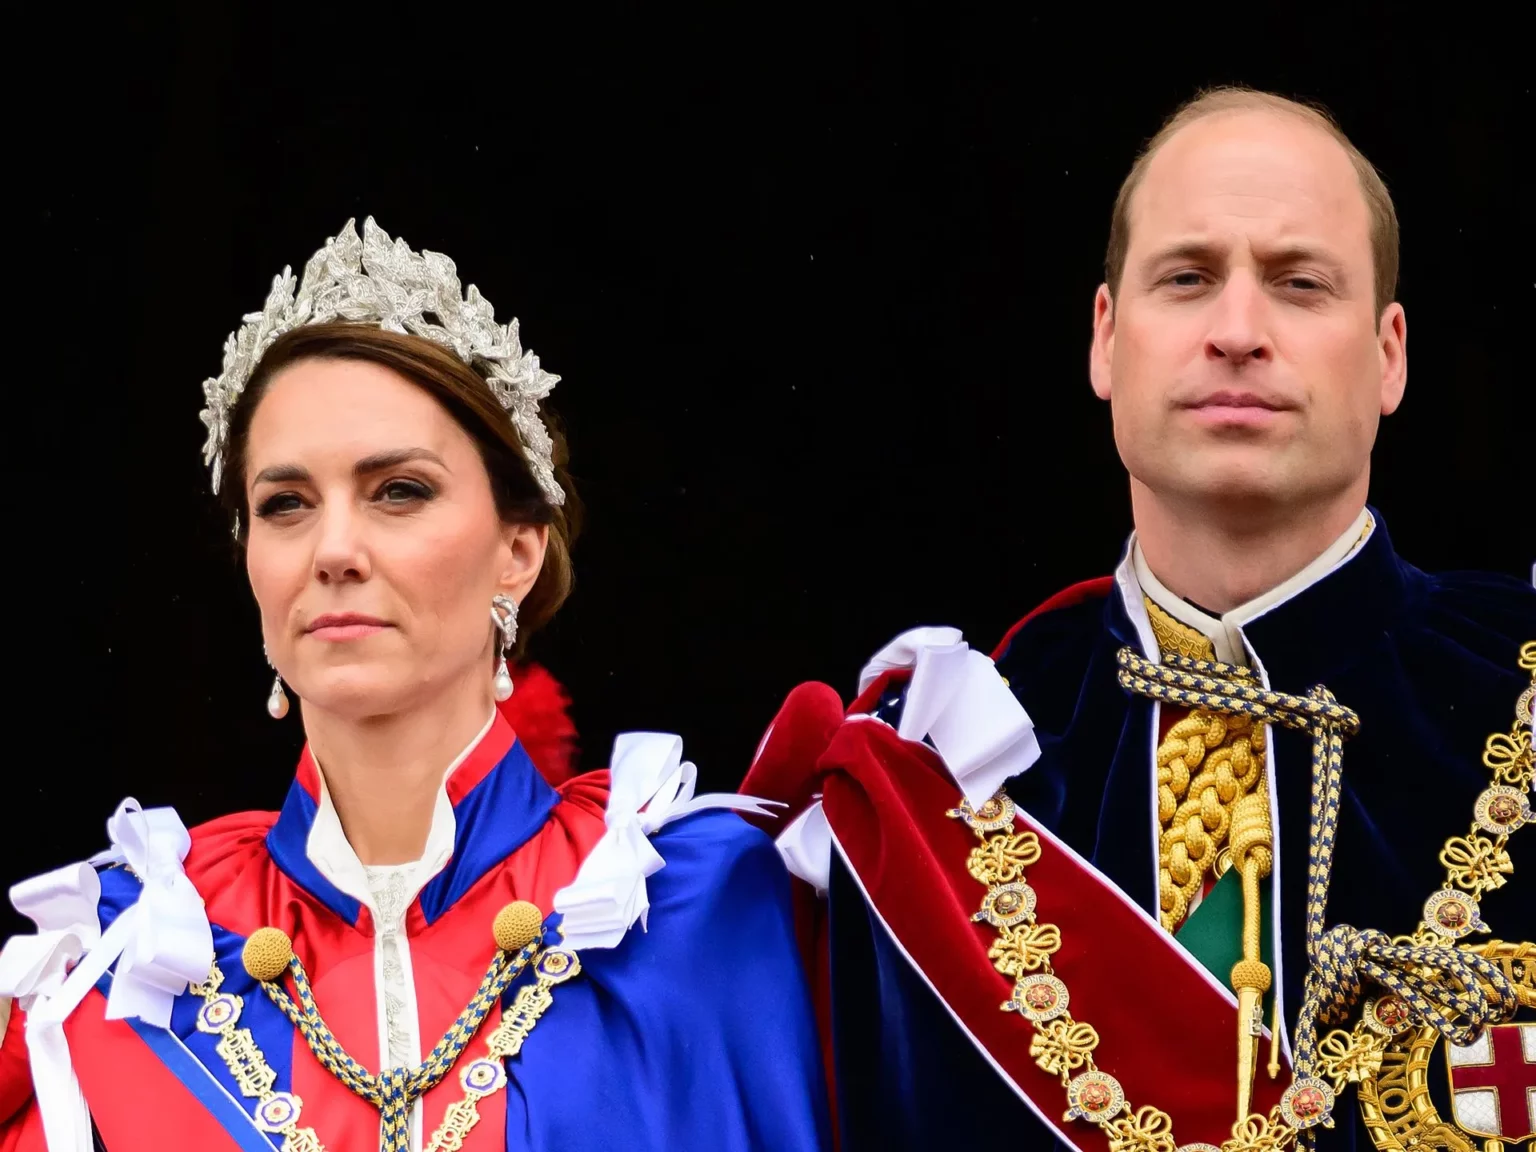 why-were-prince-william-and-kate-late-to-the-coronation-and-what-caused-the-delay